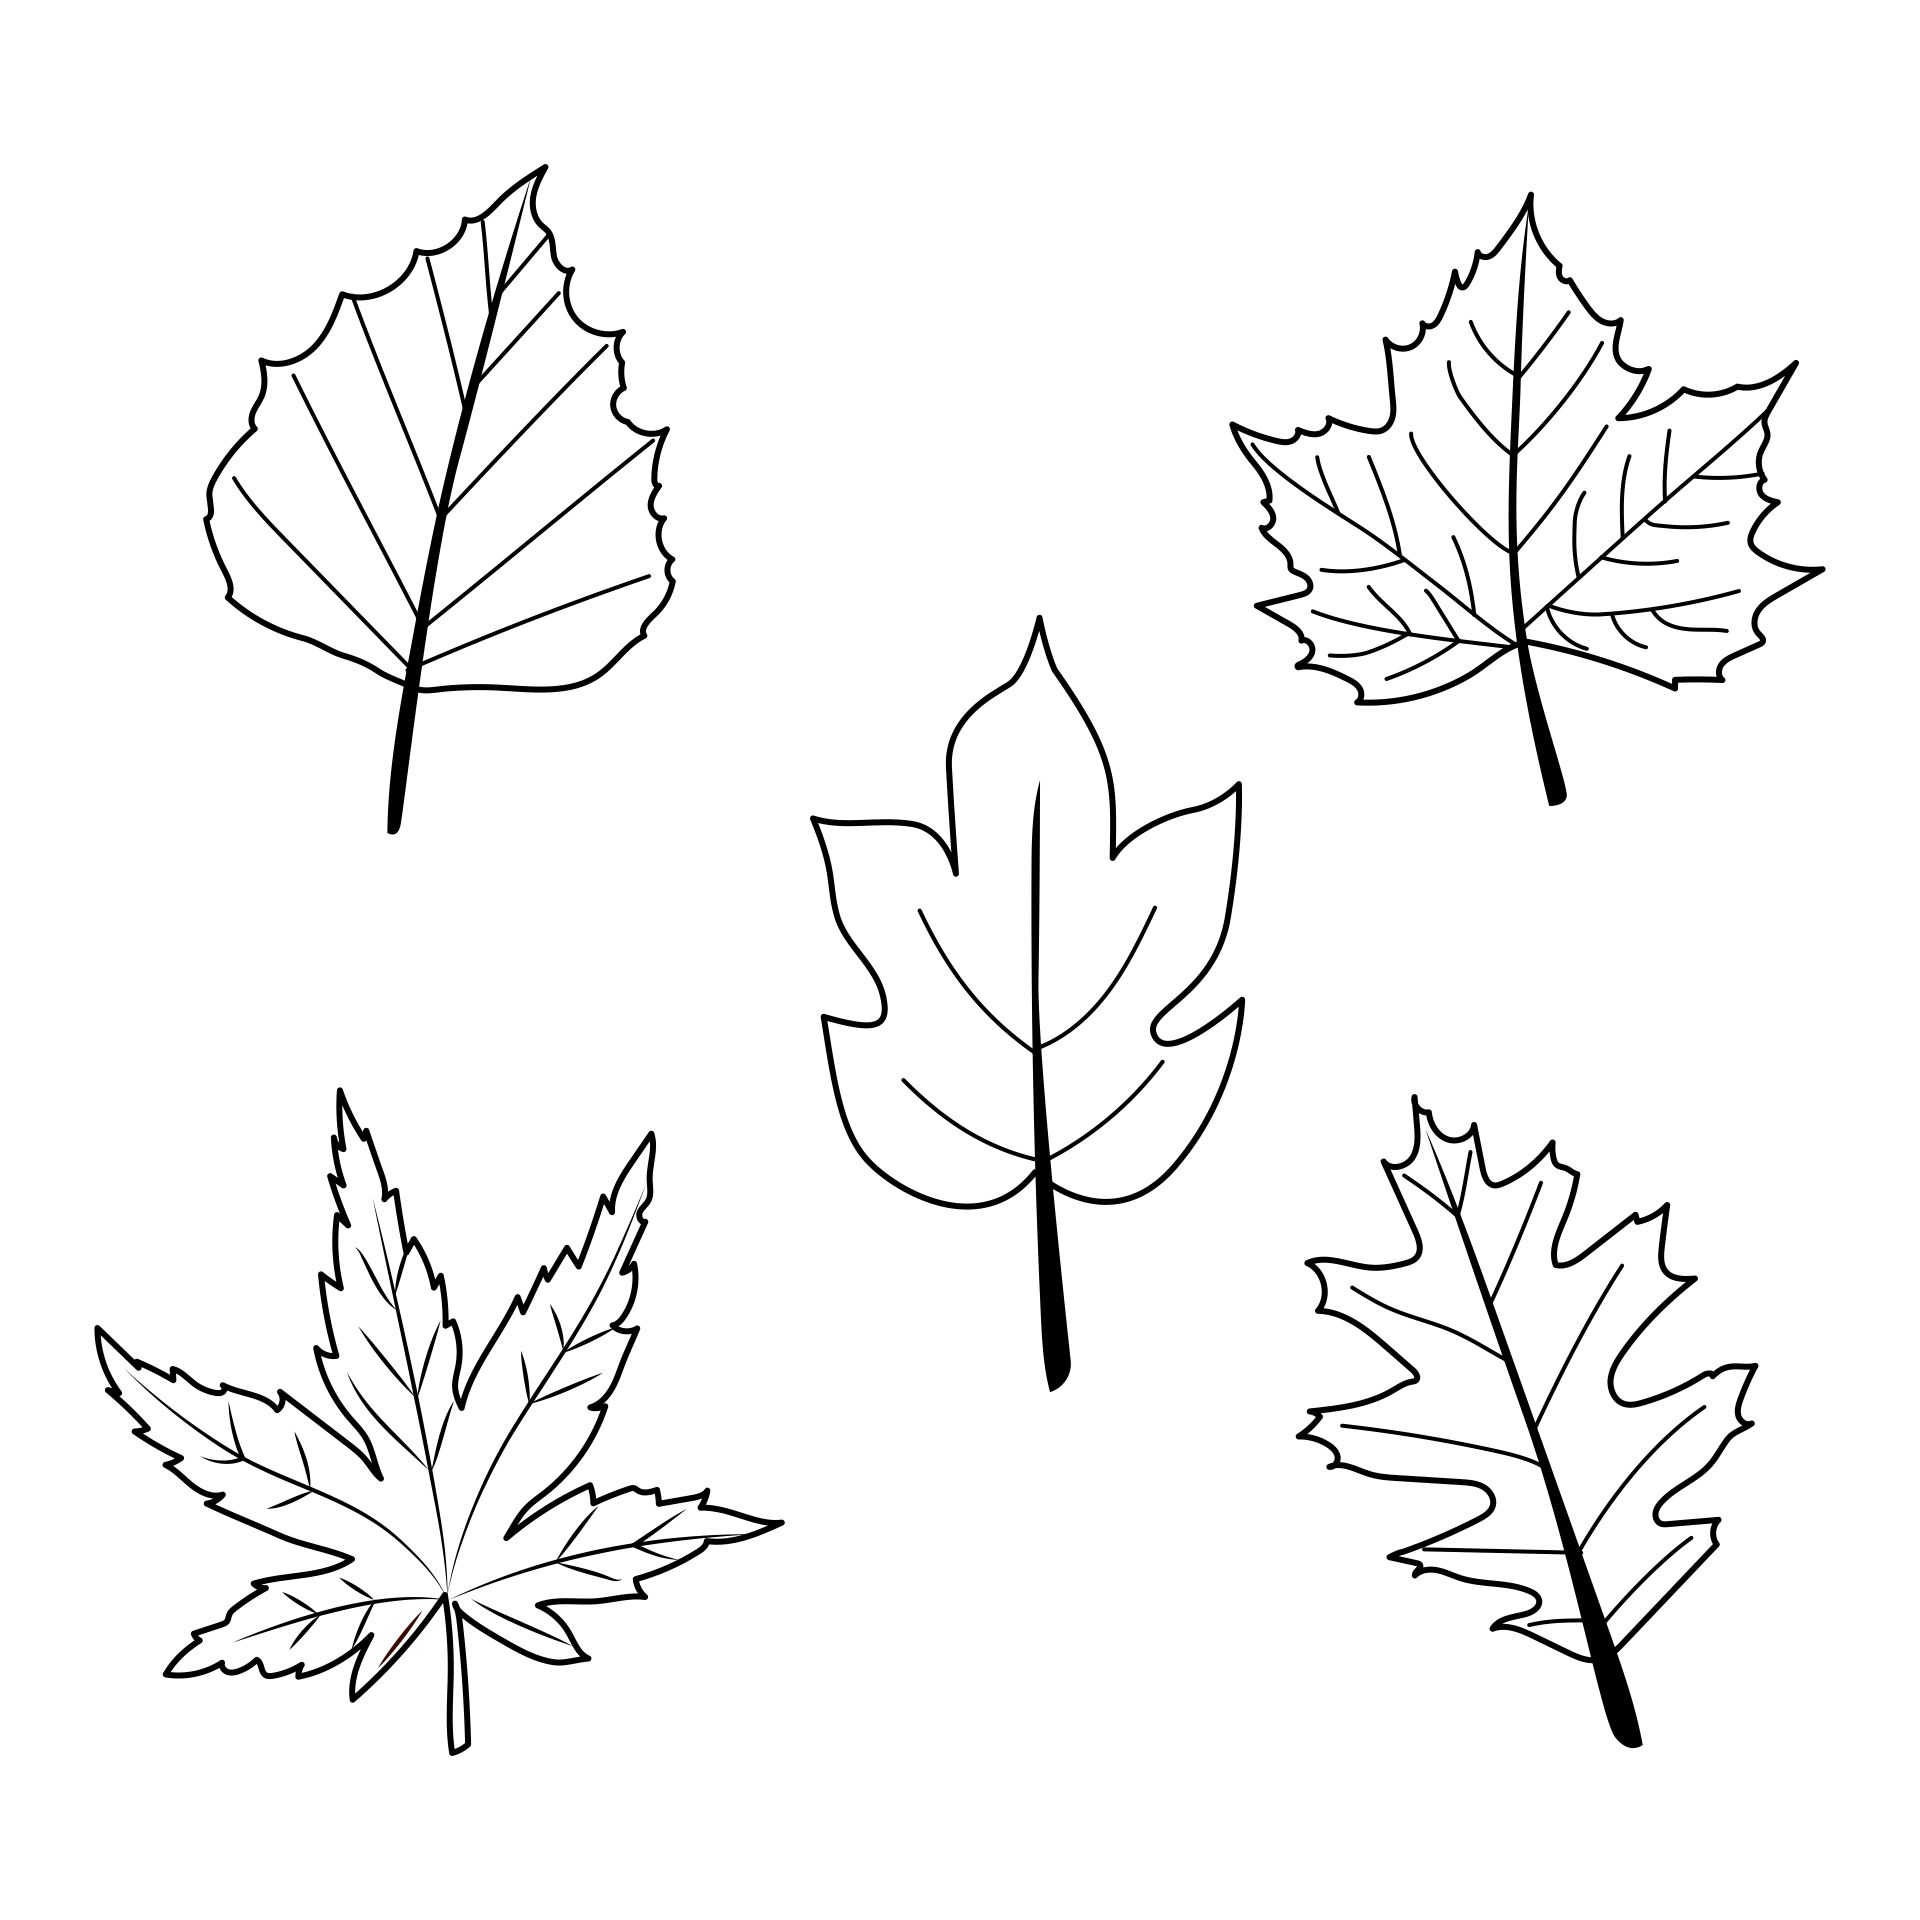 5-best-images-of-printable-fall-leaves-shapes-printable-leaf-shapes